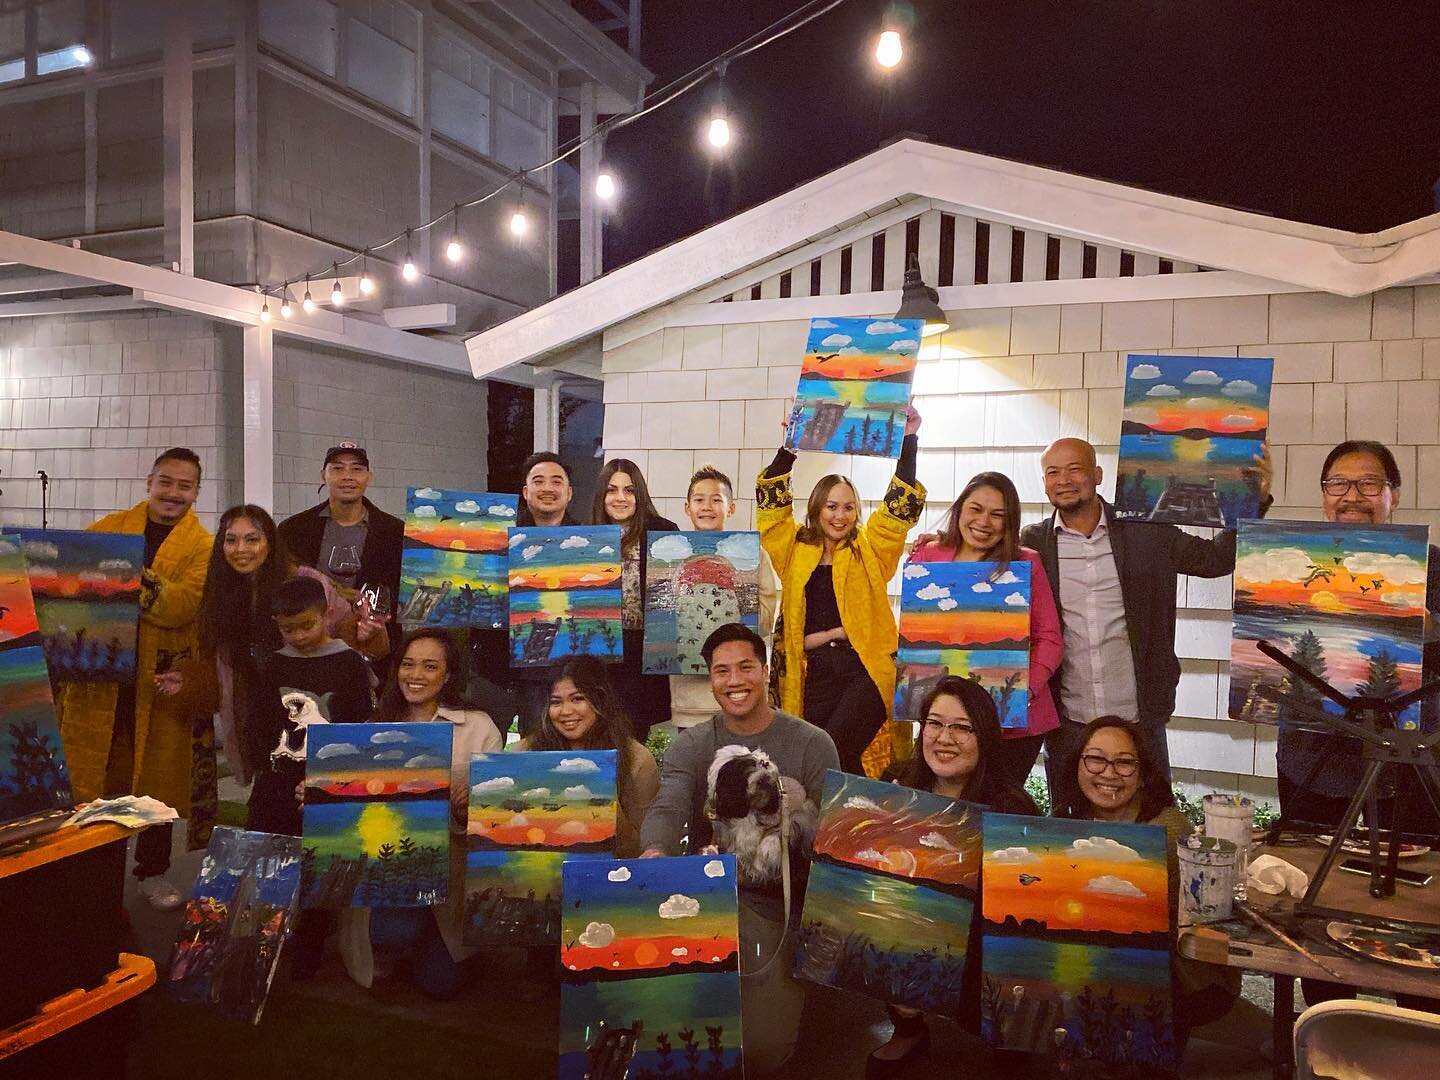 A private event at a private residence on NYE!! We had so much fun painting and celebrating with all of you! We wish you all a wonderful 2022! #bestofla #bestoflosangeles #brushstrokesandbevs #brushstrokesandbeverages #art #artandwine #painting #pain